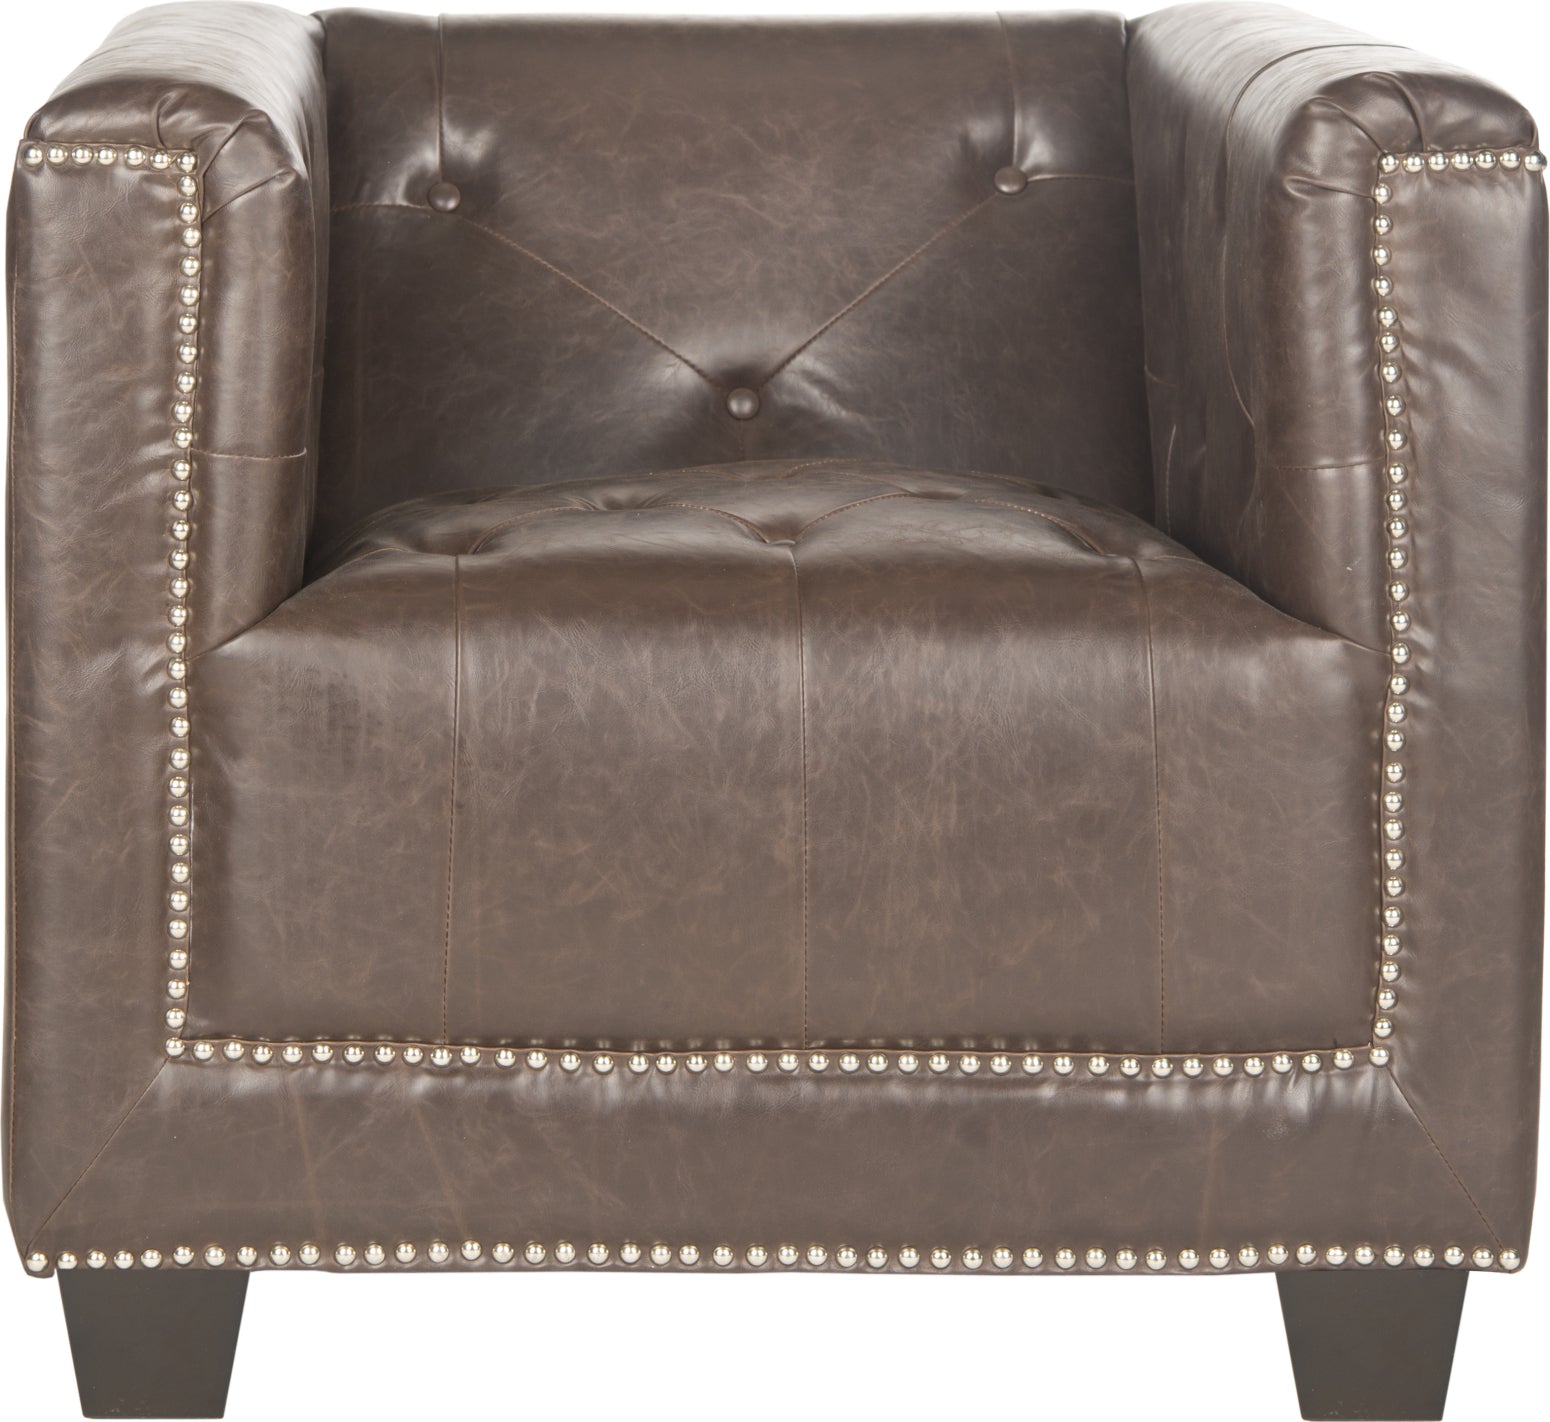 Safavieh Bentley Club Chair-Silver Nail Heads Antique Brown and Espresso Furniture main image